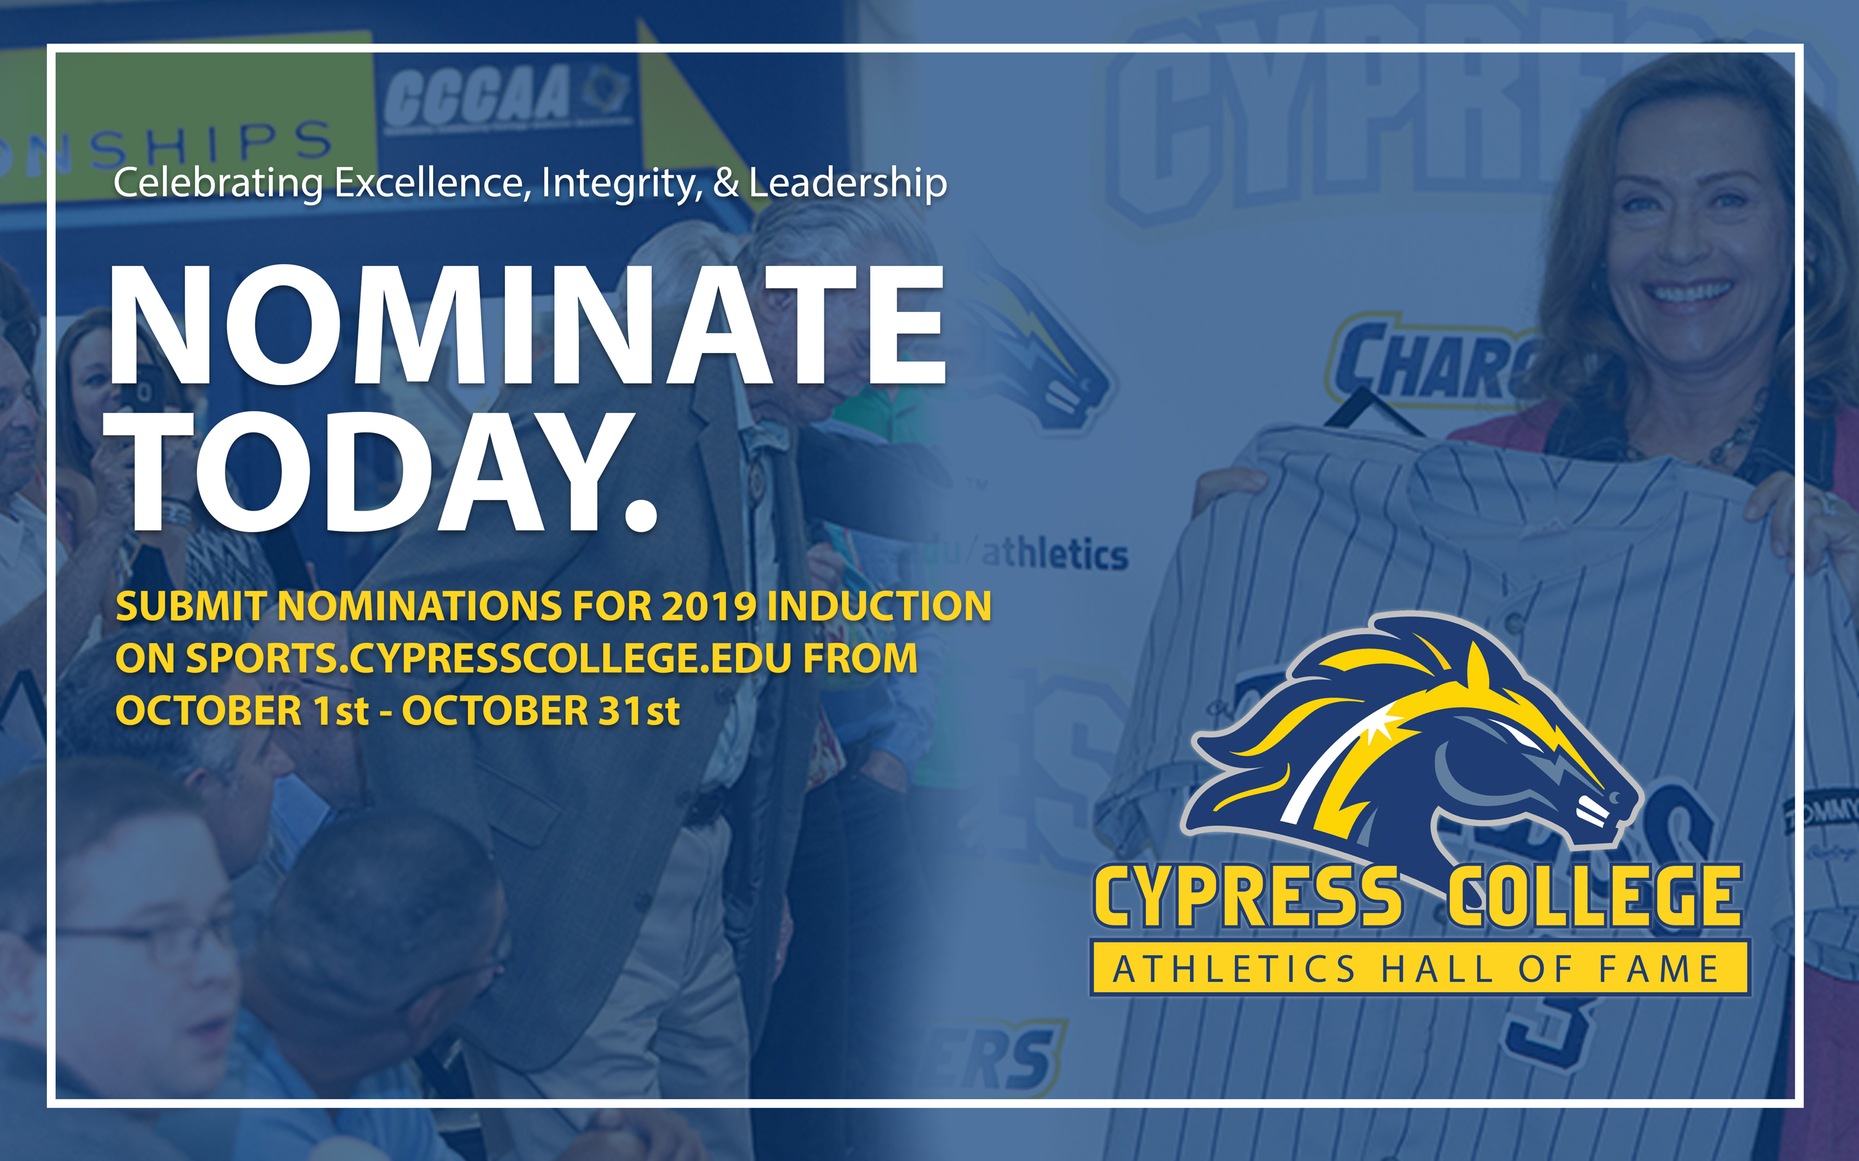 Cypress College Athletics – Call for 2019 Hall of Fame Nominations